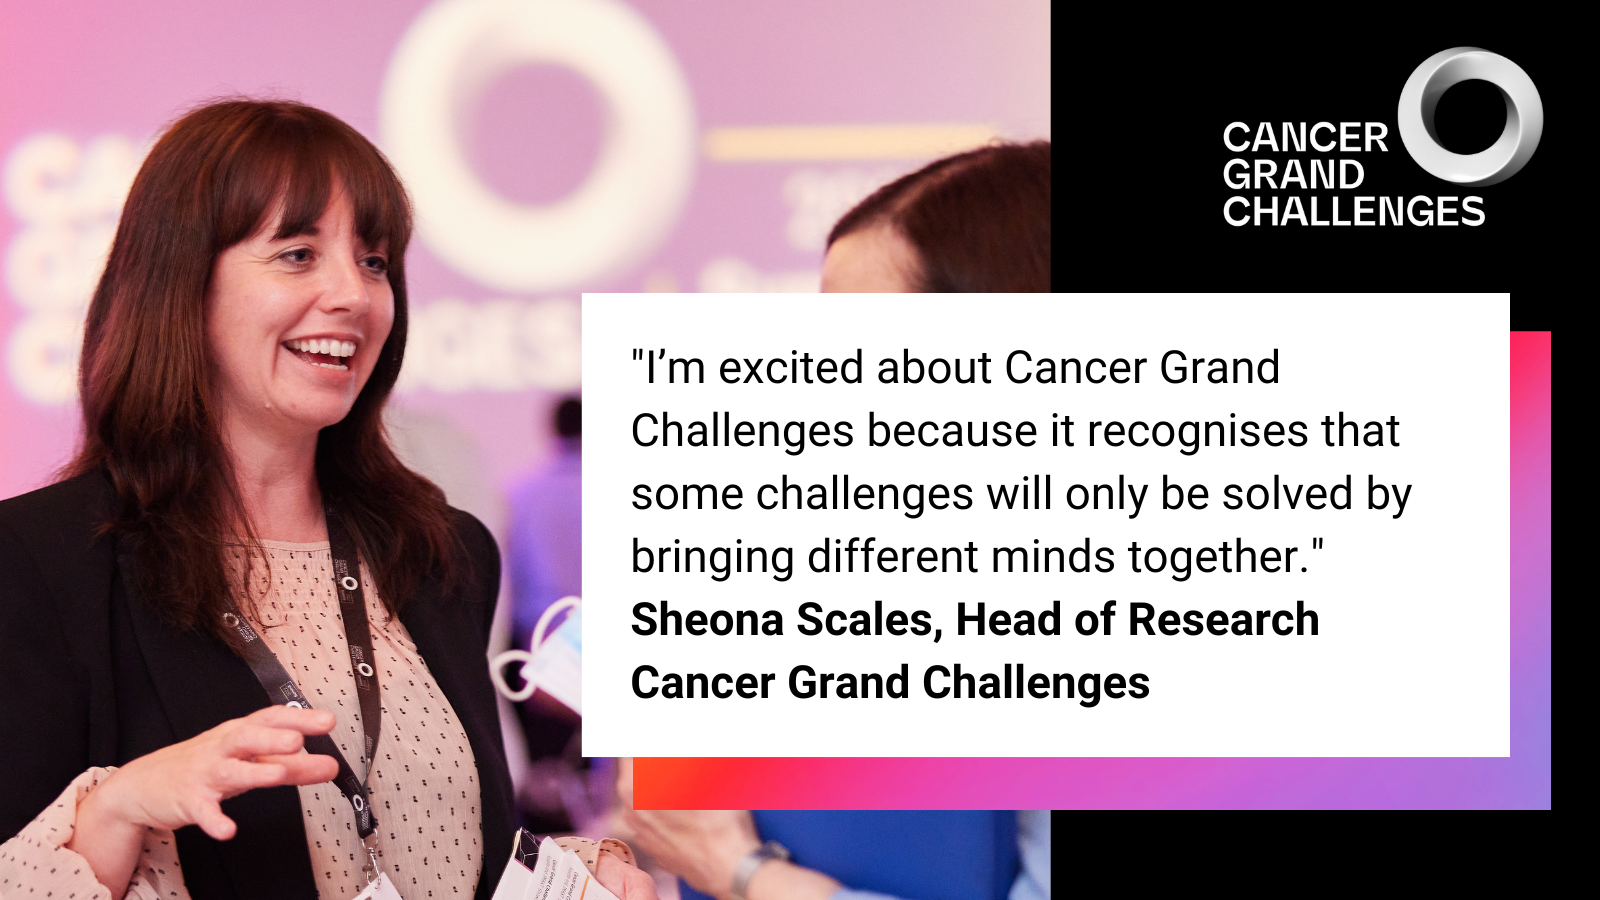 Sheona Scales - Head of Research, Cancer Grand Challenges